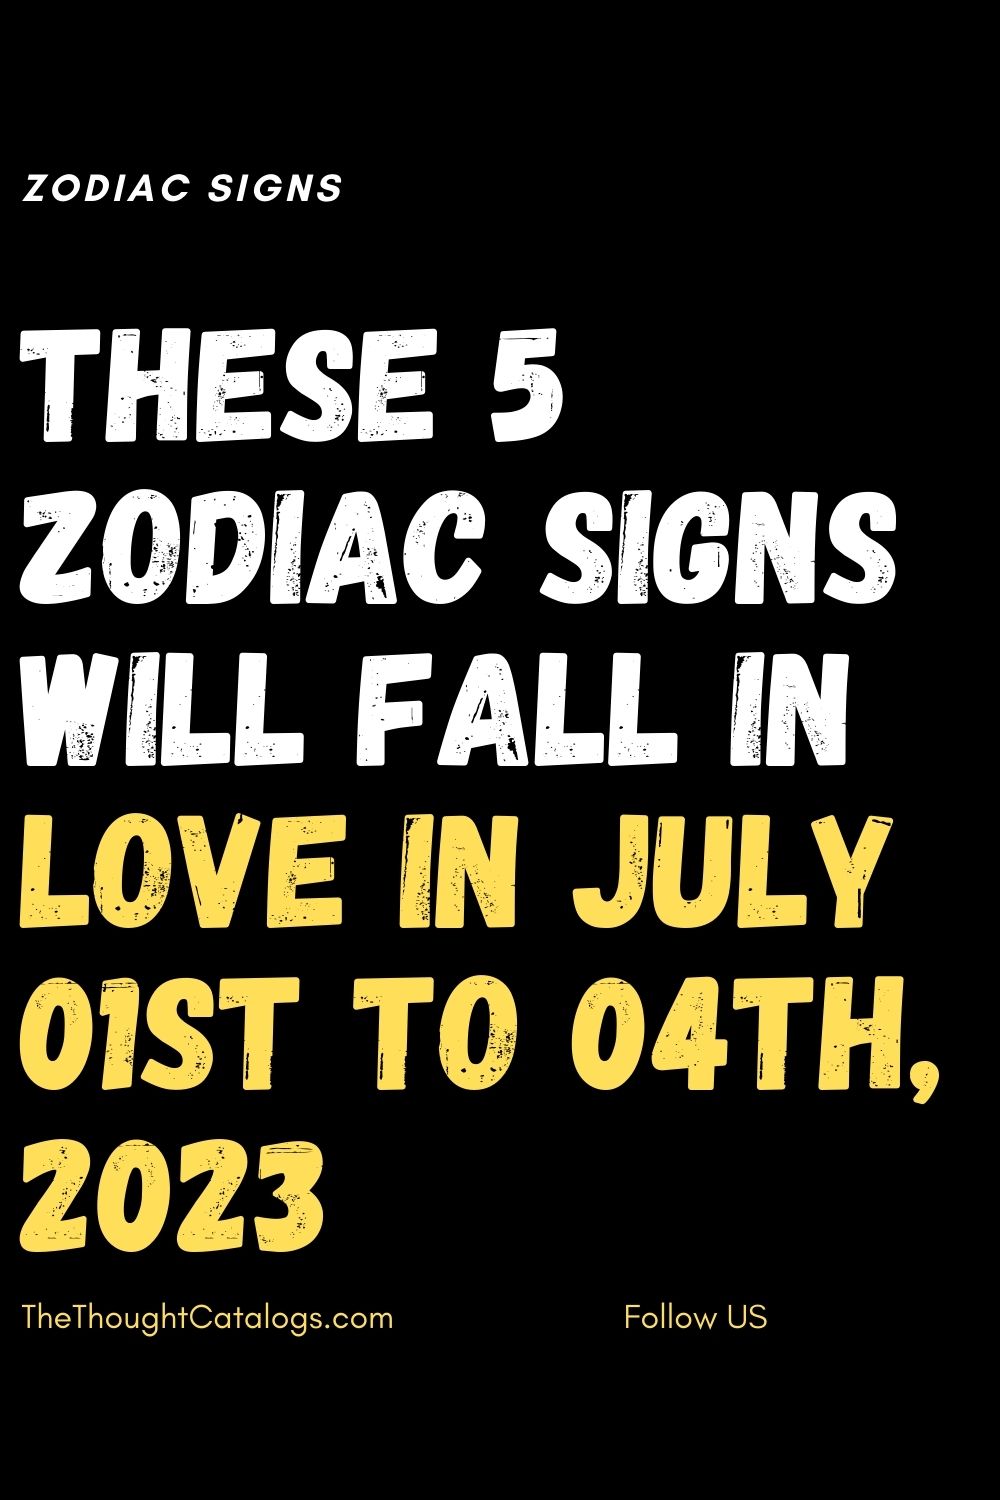 These 5 Zodiac Signs Will Fall In Love In July 01st To 04th, 2023